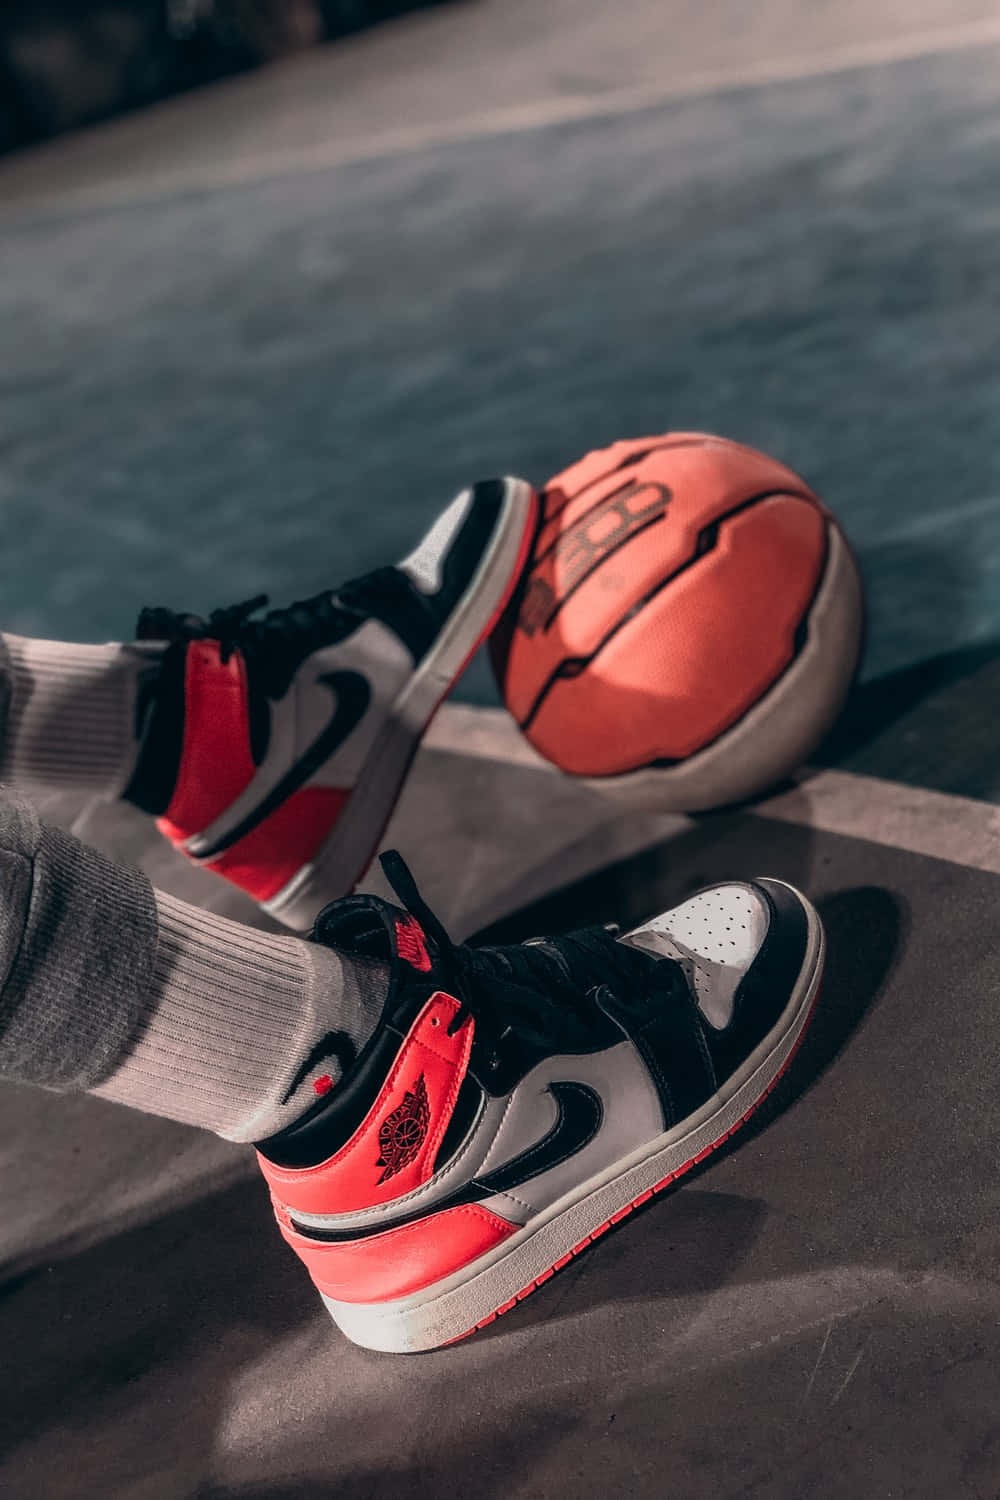 Red Jordan Shoes At The Court Wallpaper